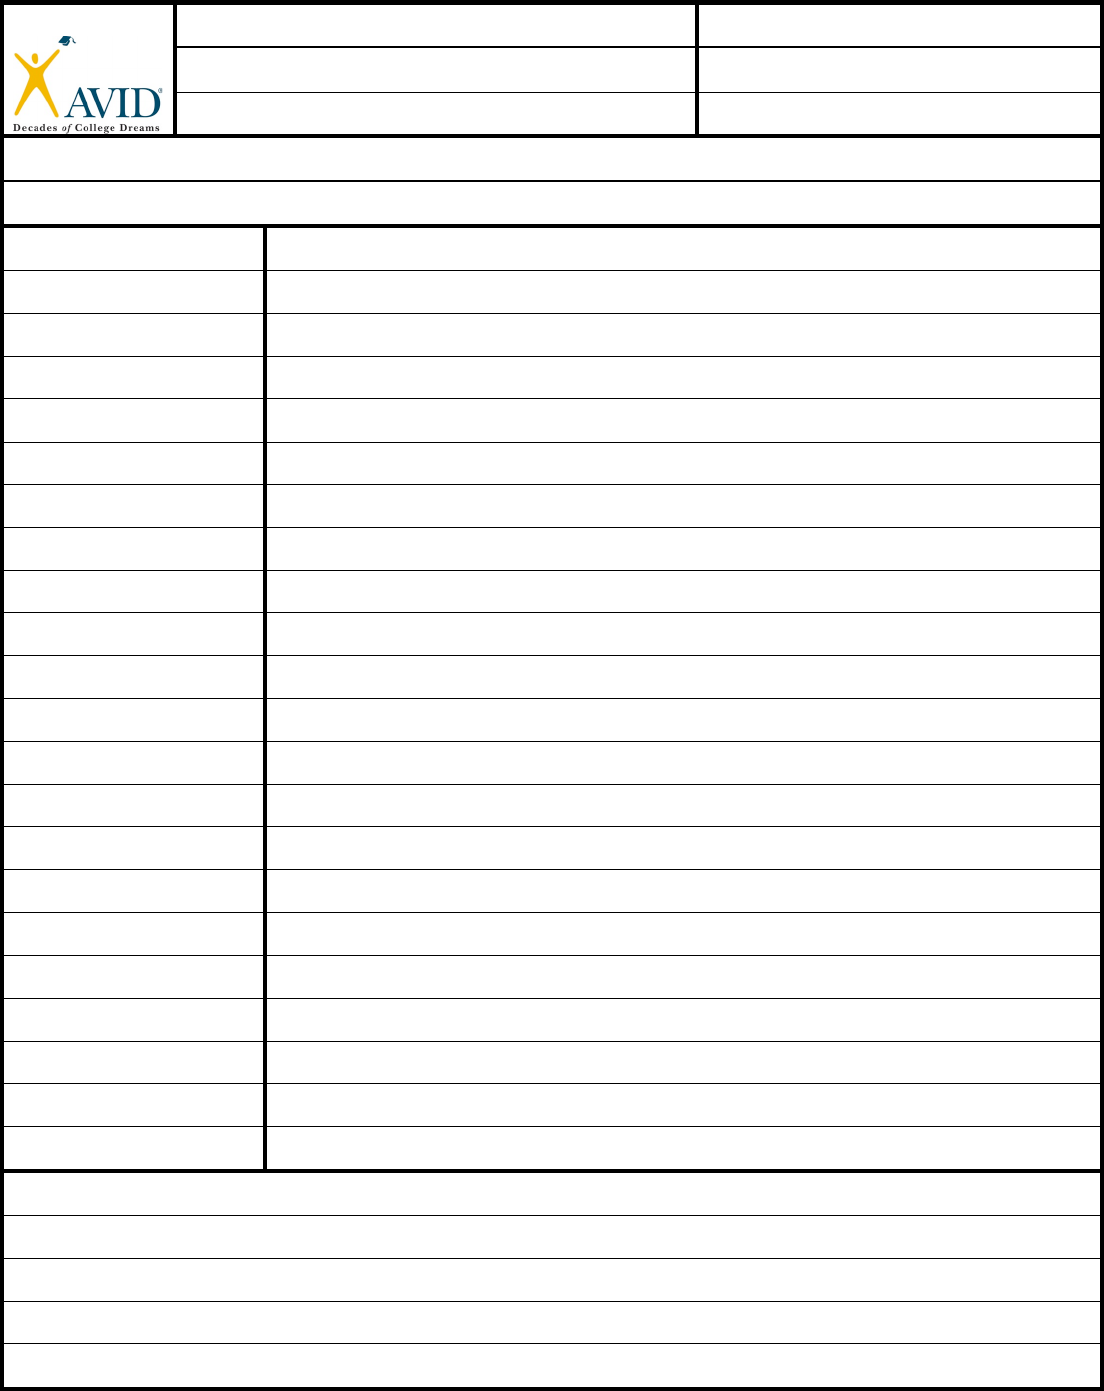 Cornell Notes Template (AVID) - Edit, Fill, Sign Online  Handypdf Throughout Avid Cornell Notes Template Pdf